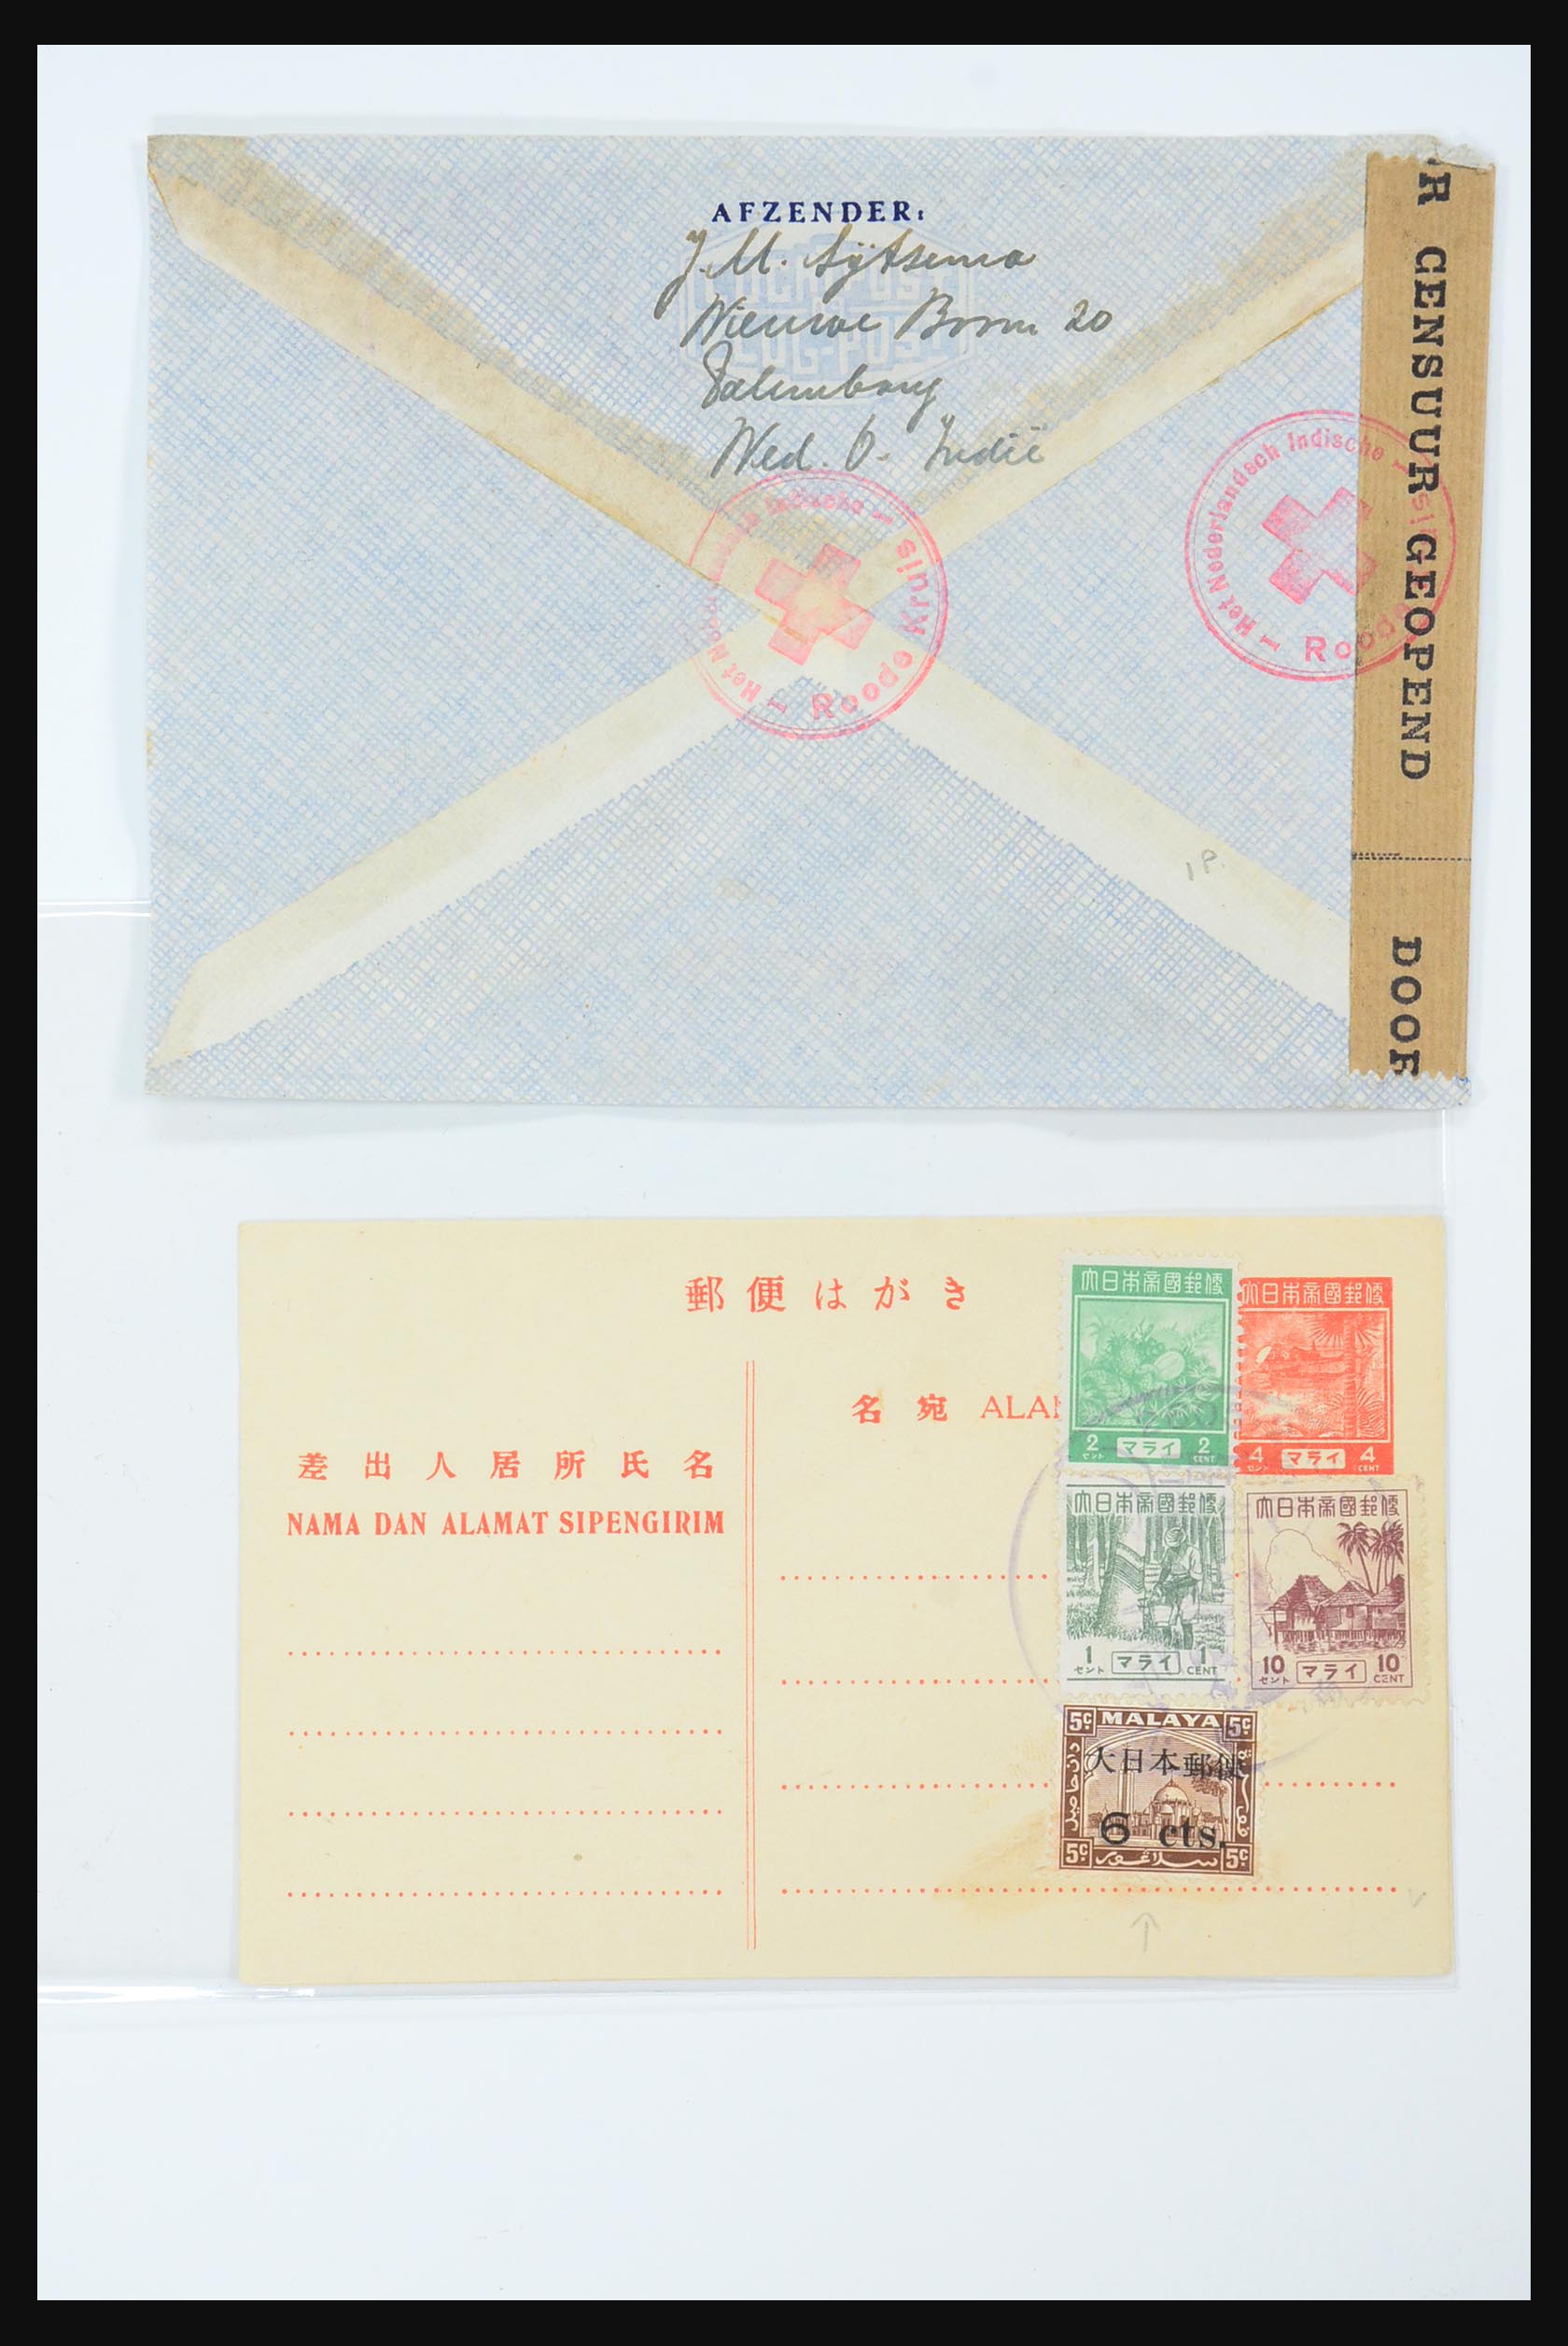 31362 090 - 31362 Netherlands Indies Japanese occupation covers 1942-1945.